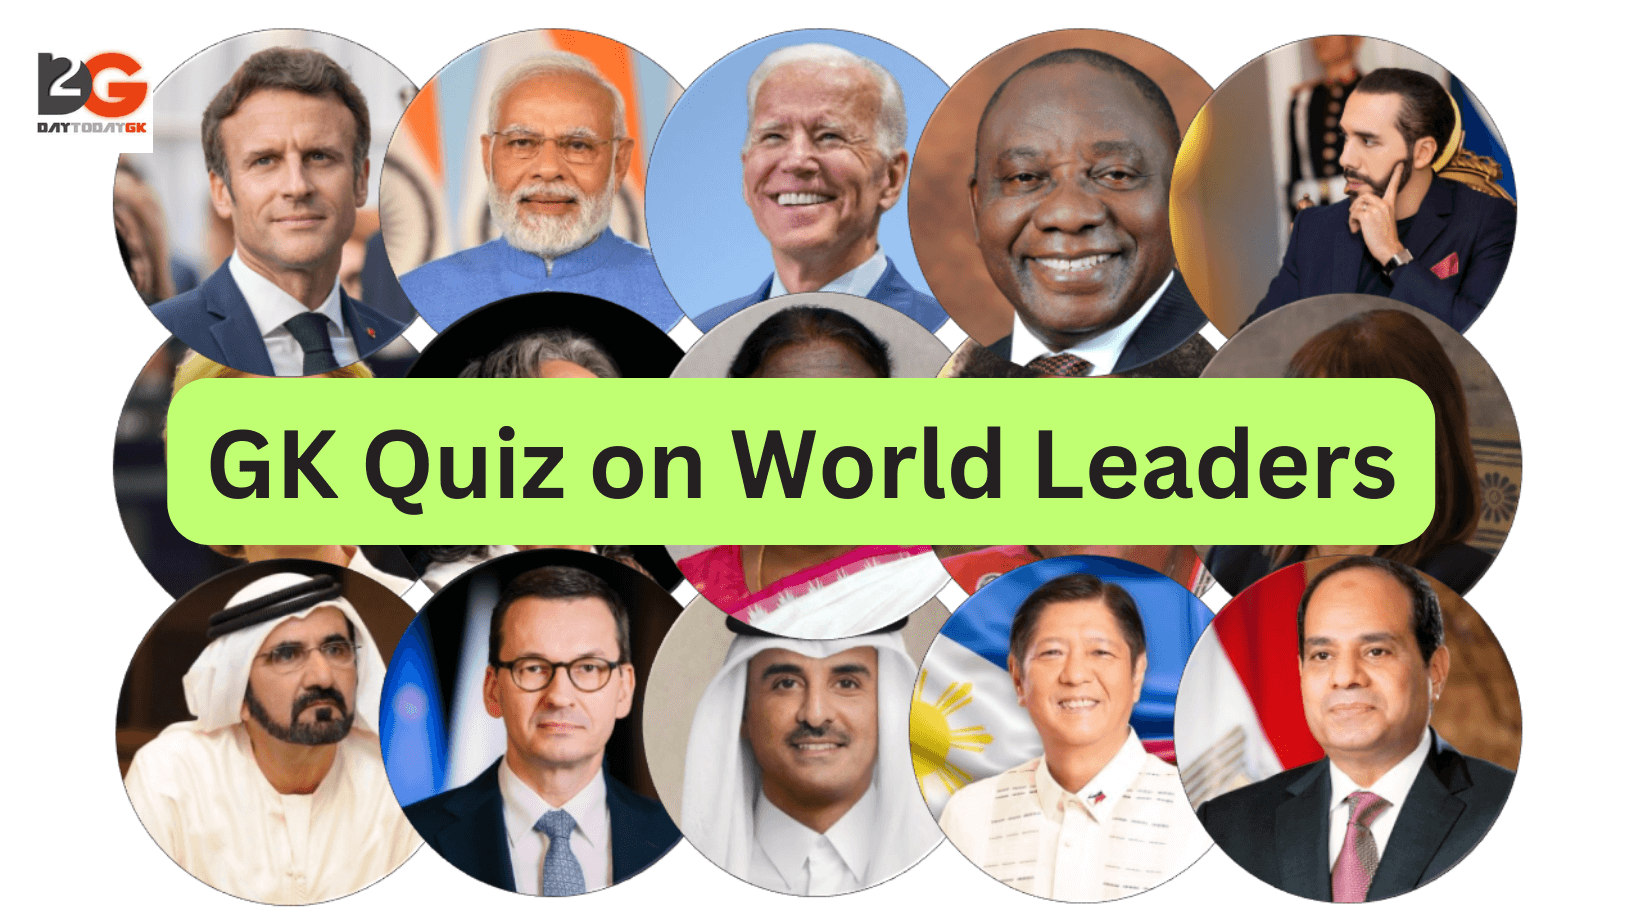 GK Quiz on World Leaders with Answers